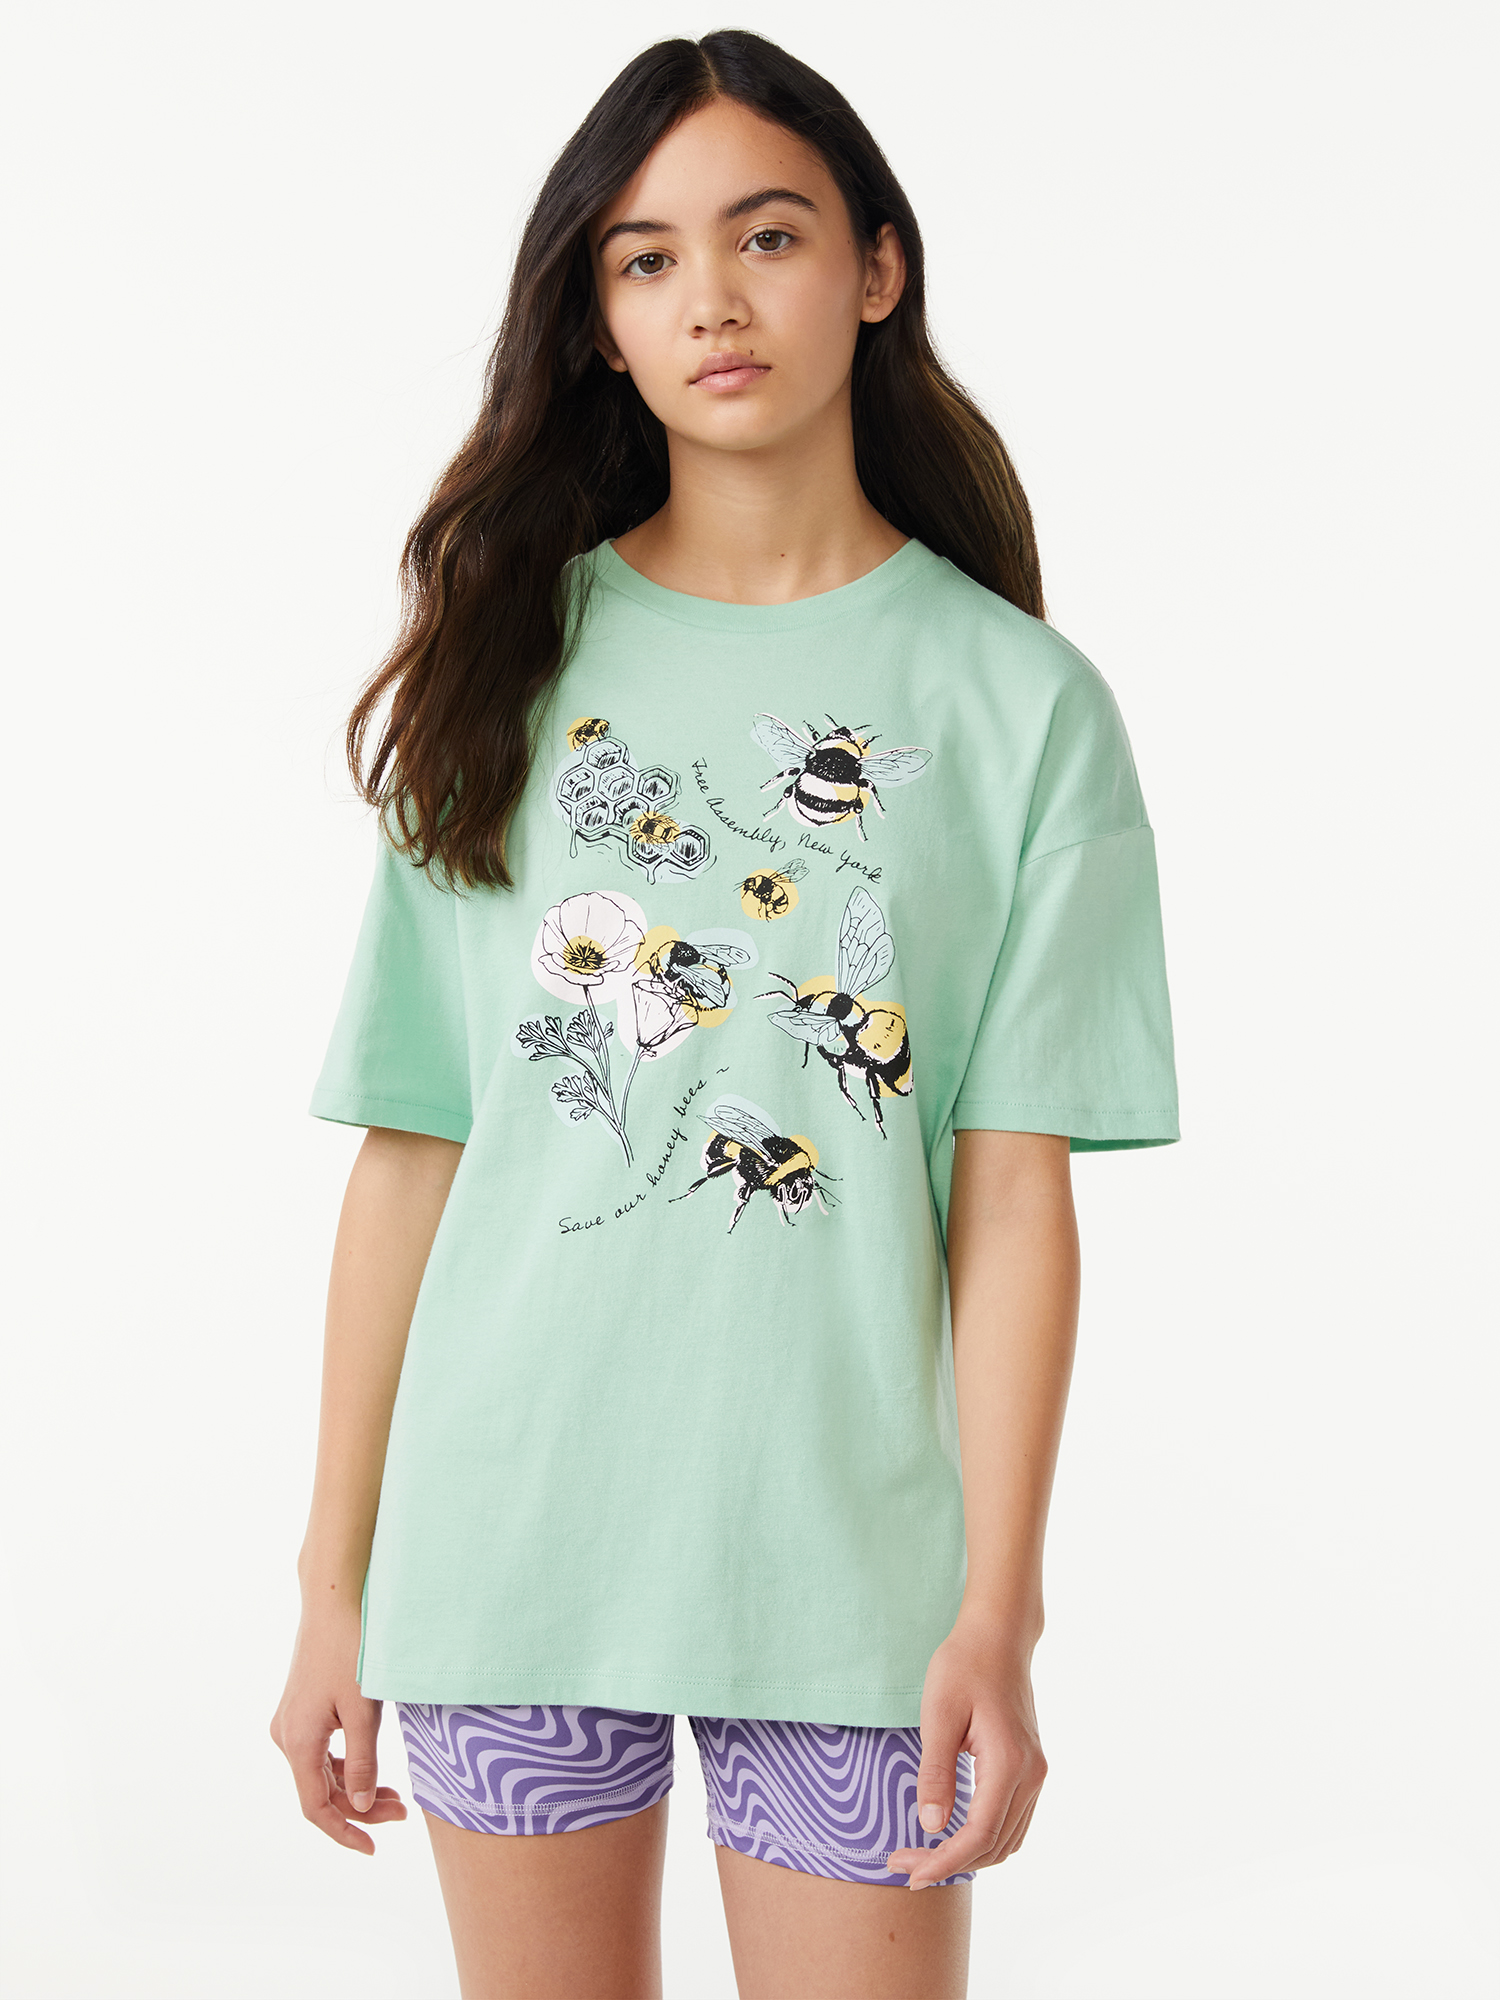 Free Assembly Girls Oversized Graphic Tee with Short Sleeves, Sizes 4-18 - image 1 of 5